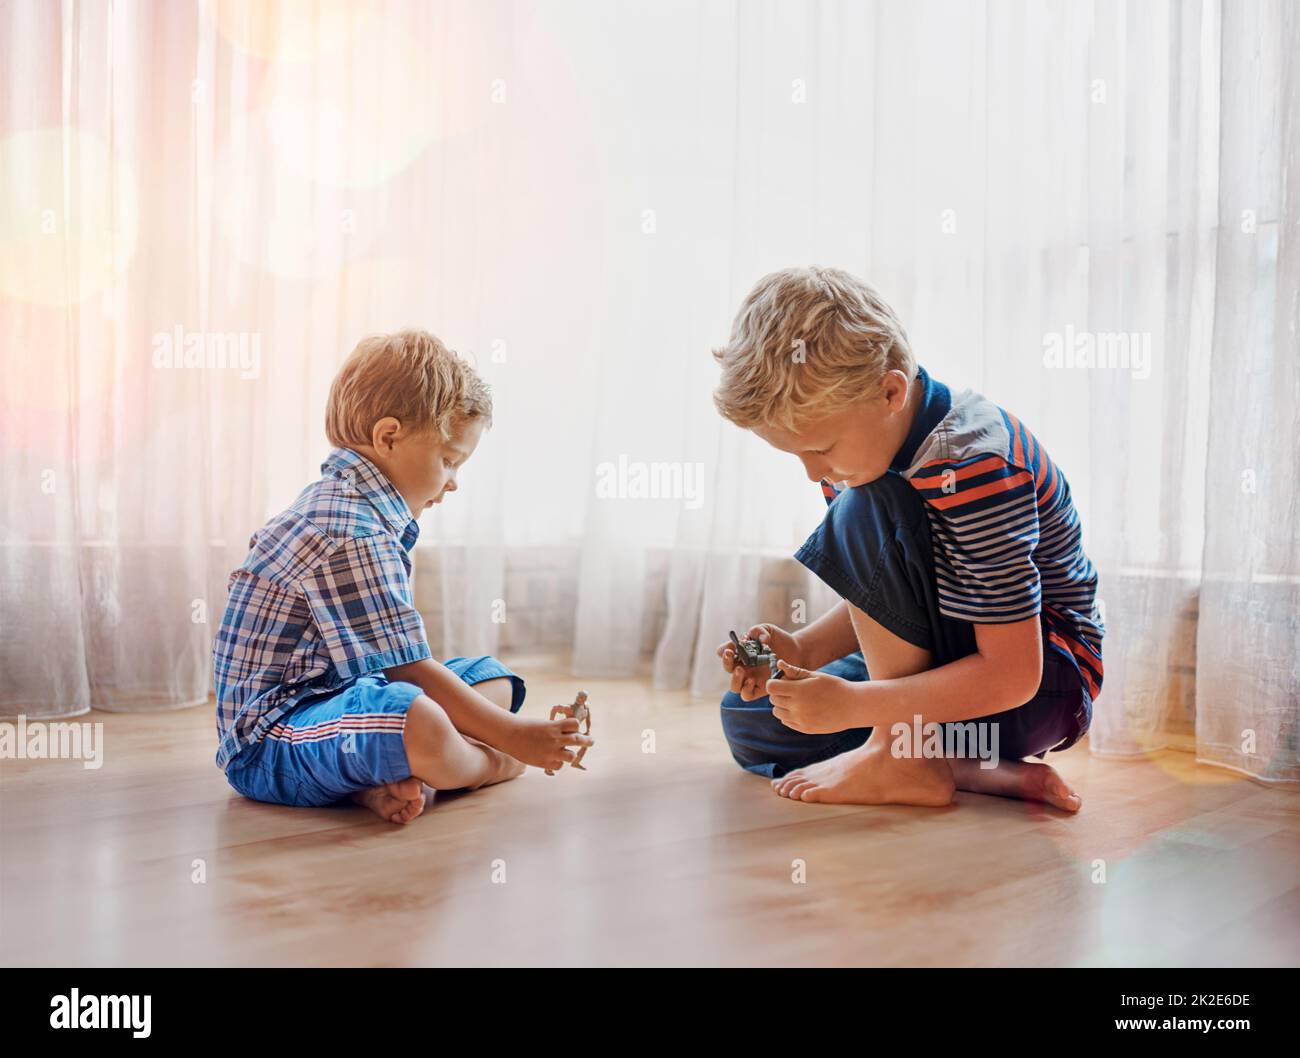 Let the games begin. Shot of two little boys playing together at home. Stock Photo